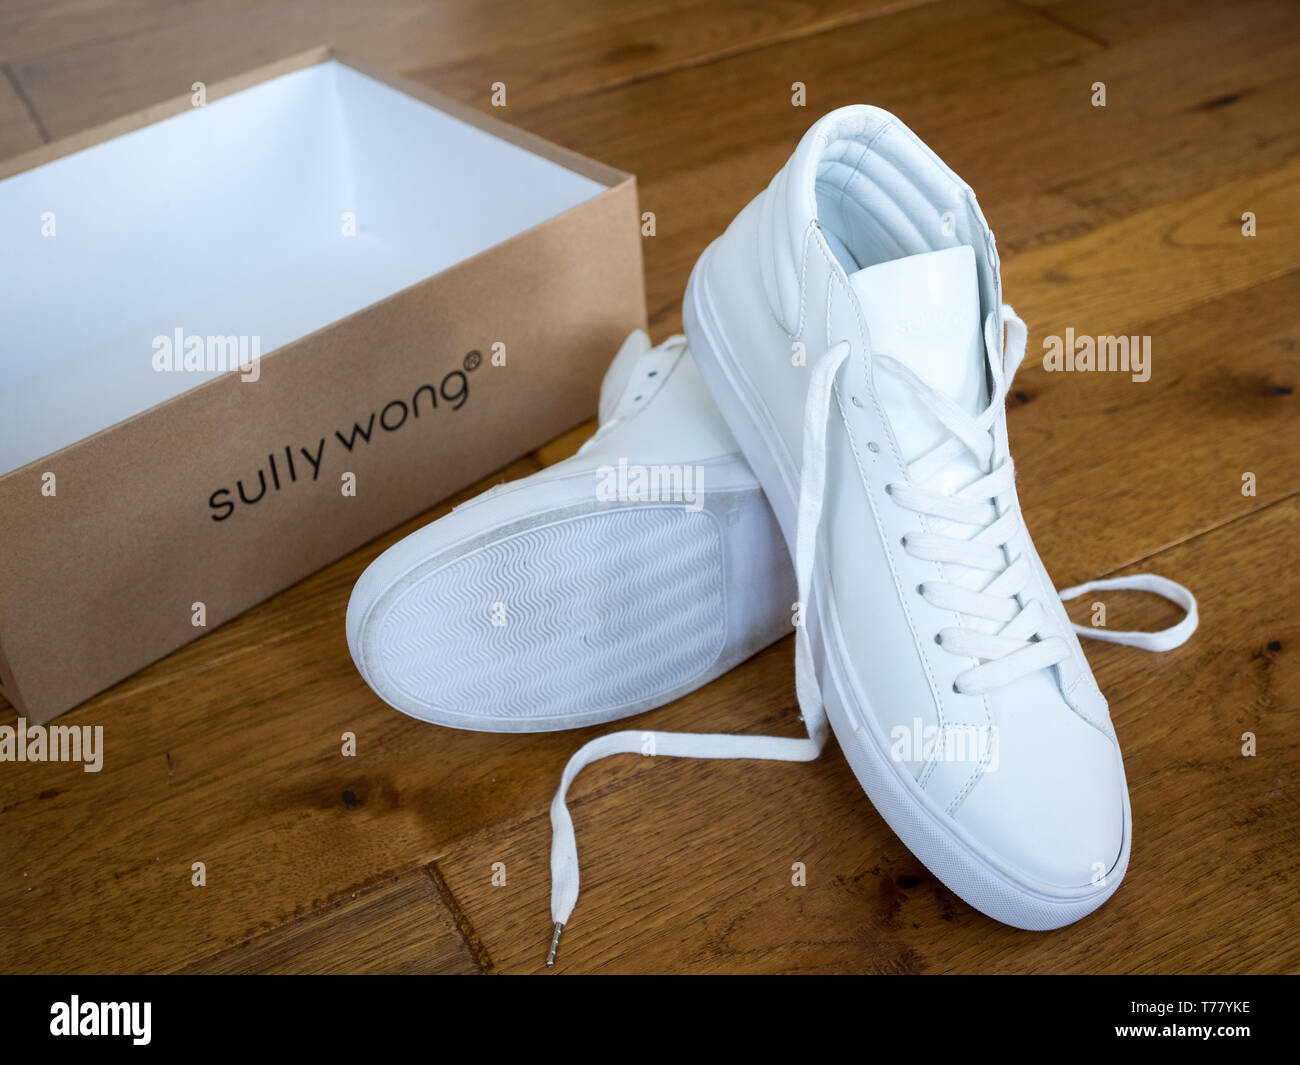 A pair of white high top sneakers from Sully Wong, an indie Canadian shoe brand. Stock Photo